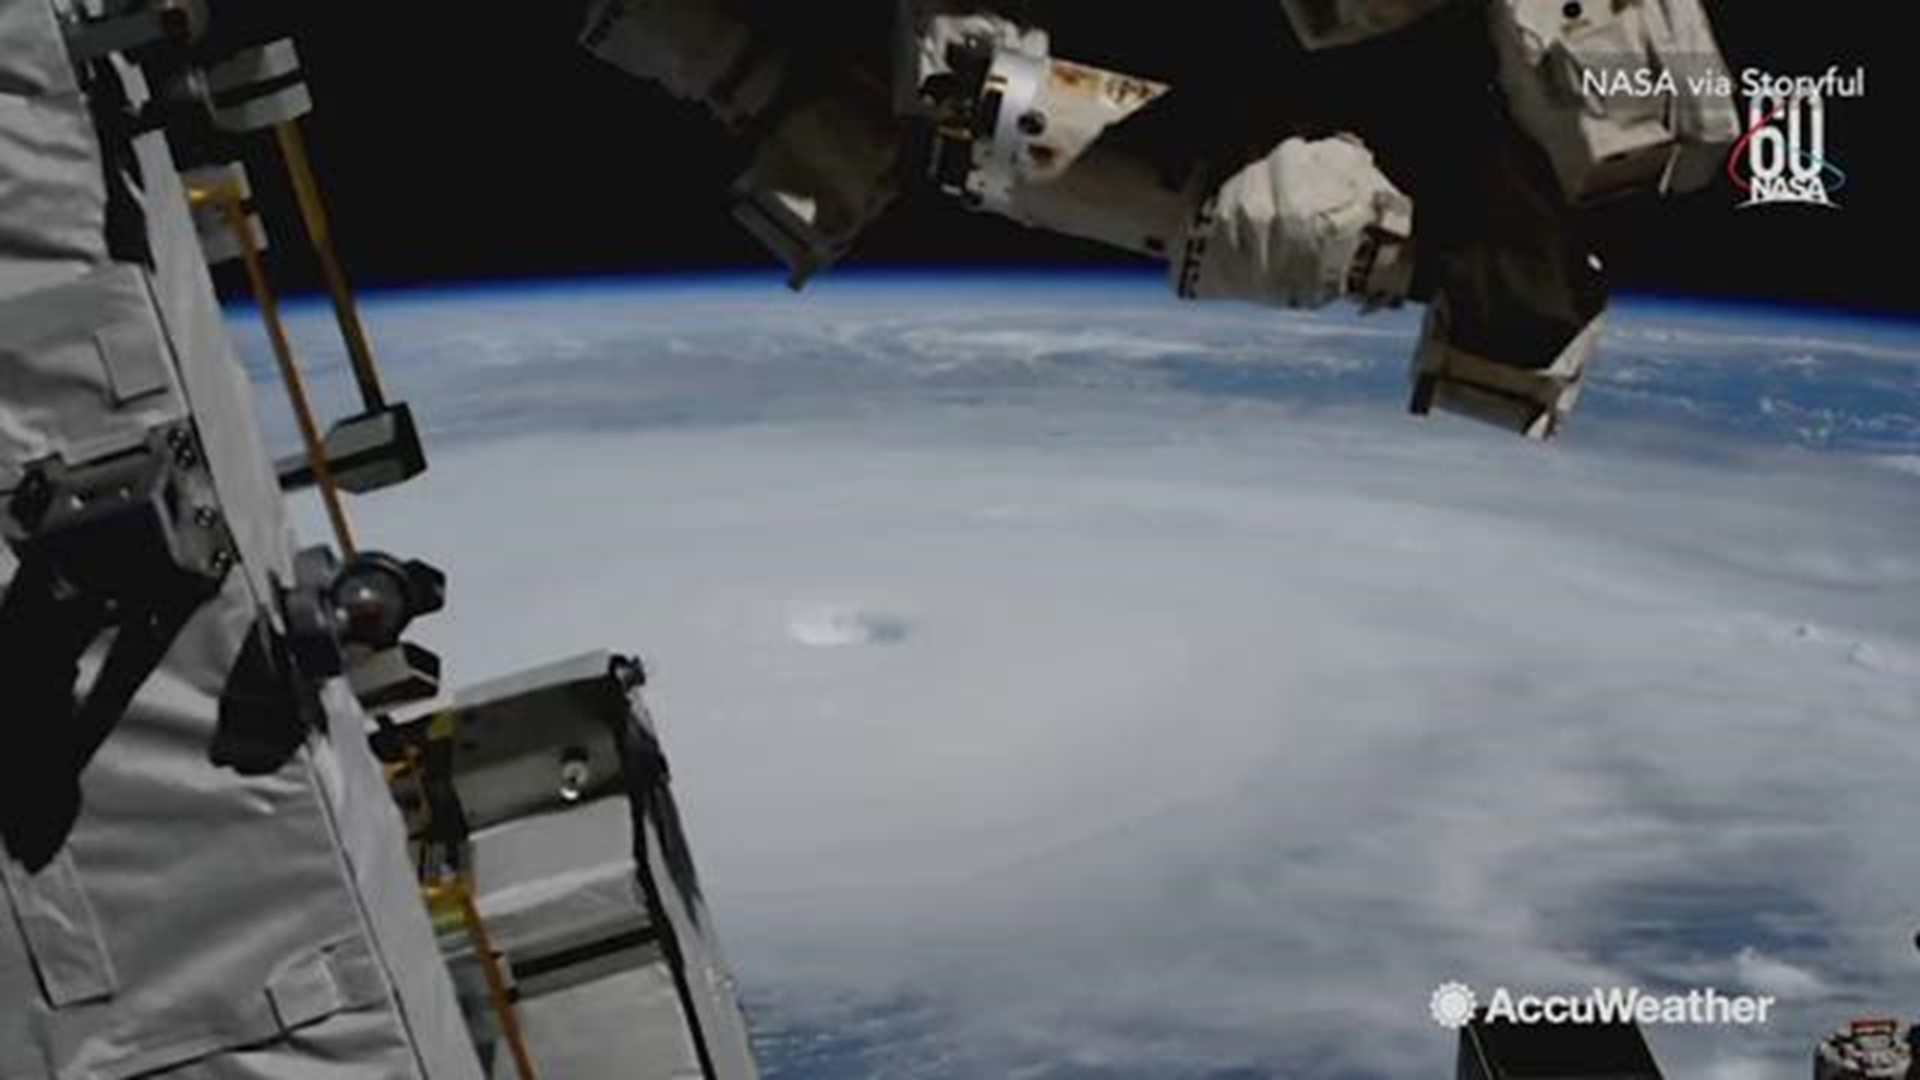 This is a flyover of the International Space Station of Hurricane Michael as it makes landfall near Mexico Beach, Florida after 1:30 PM ET on October 10.